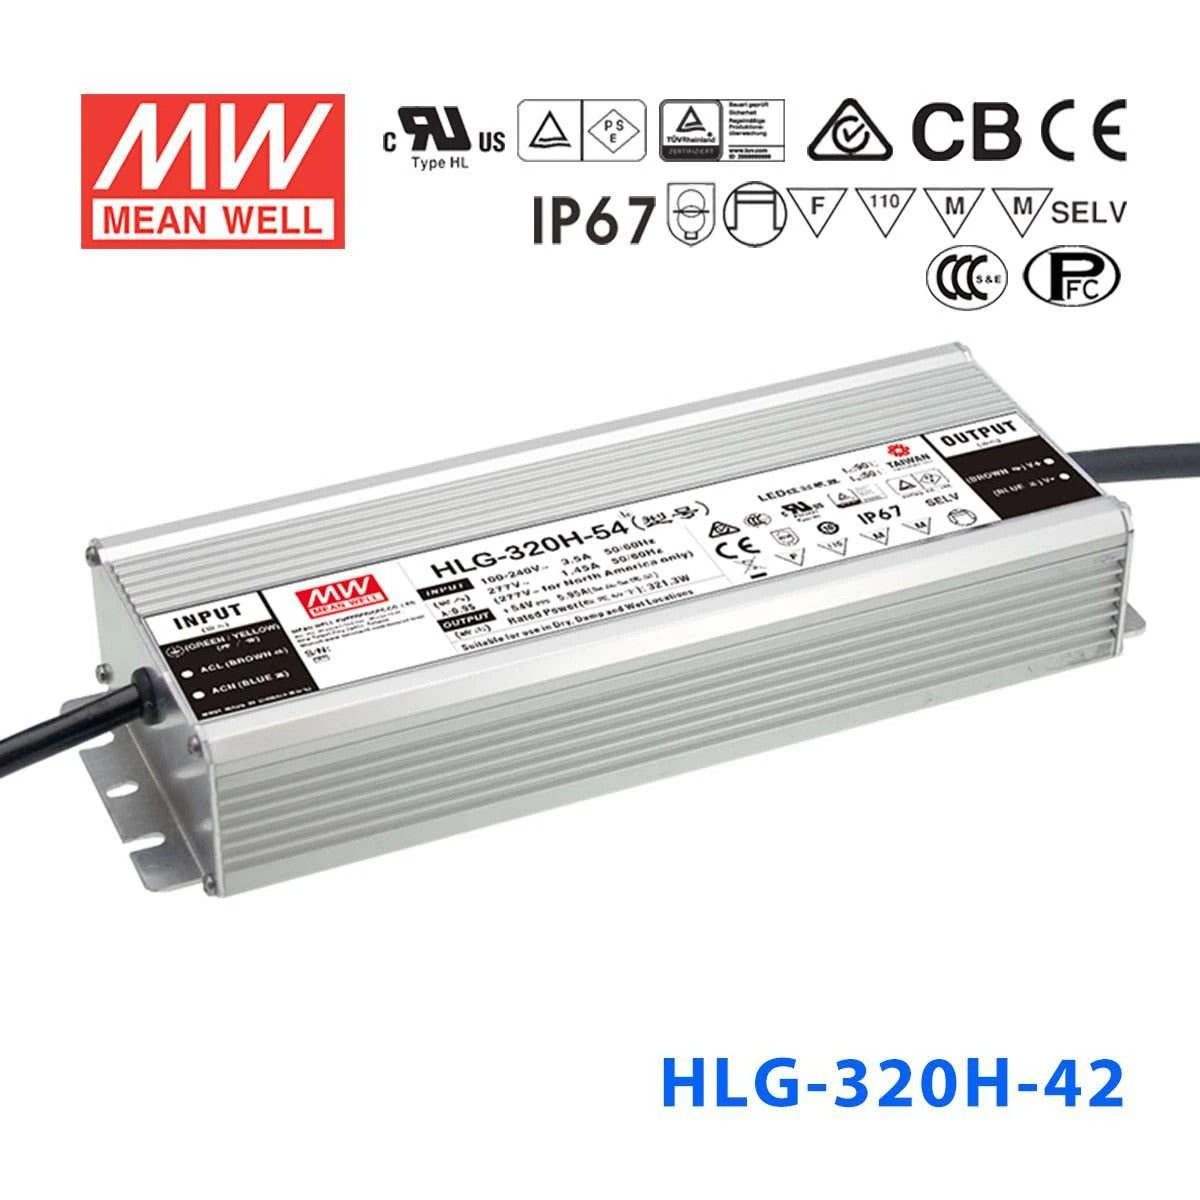 Mean Well HLG-320H-42 Power Supply 320W 42V